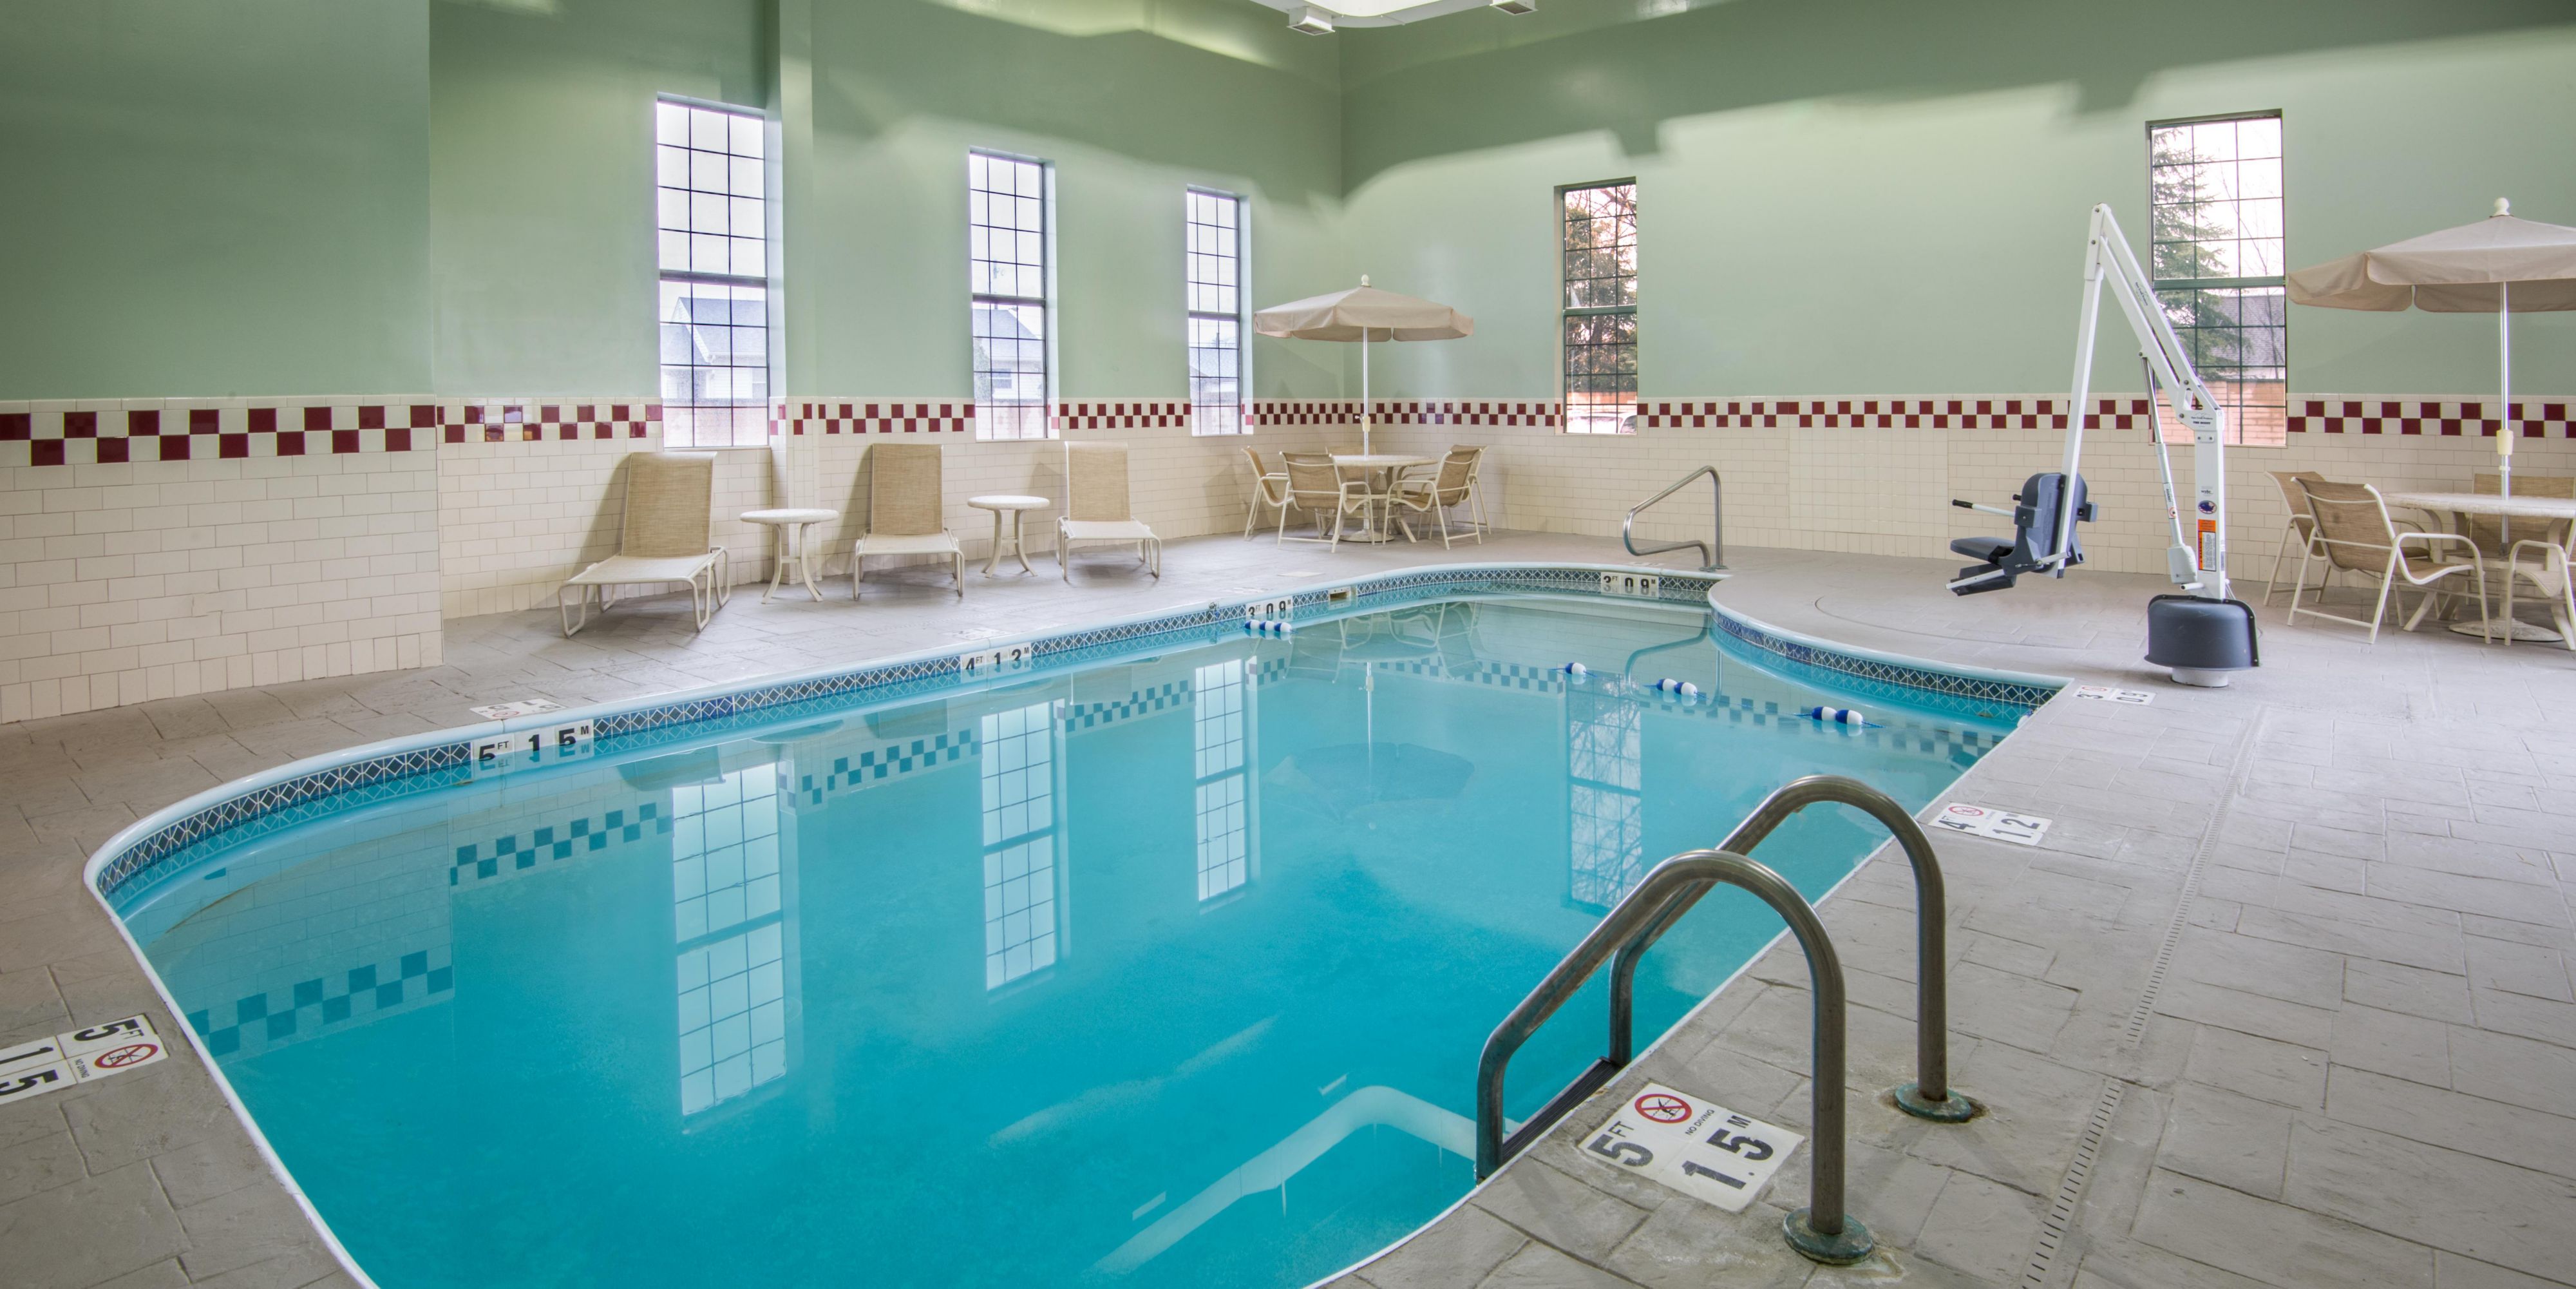 No matter the season, our indoor pool provides a perfect year-round escape. Splash into family fun, energize your morning with an invigorating swim, or unwind at the end of a long day with a relaxing dip. 